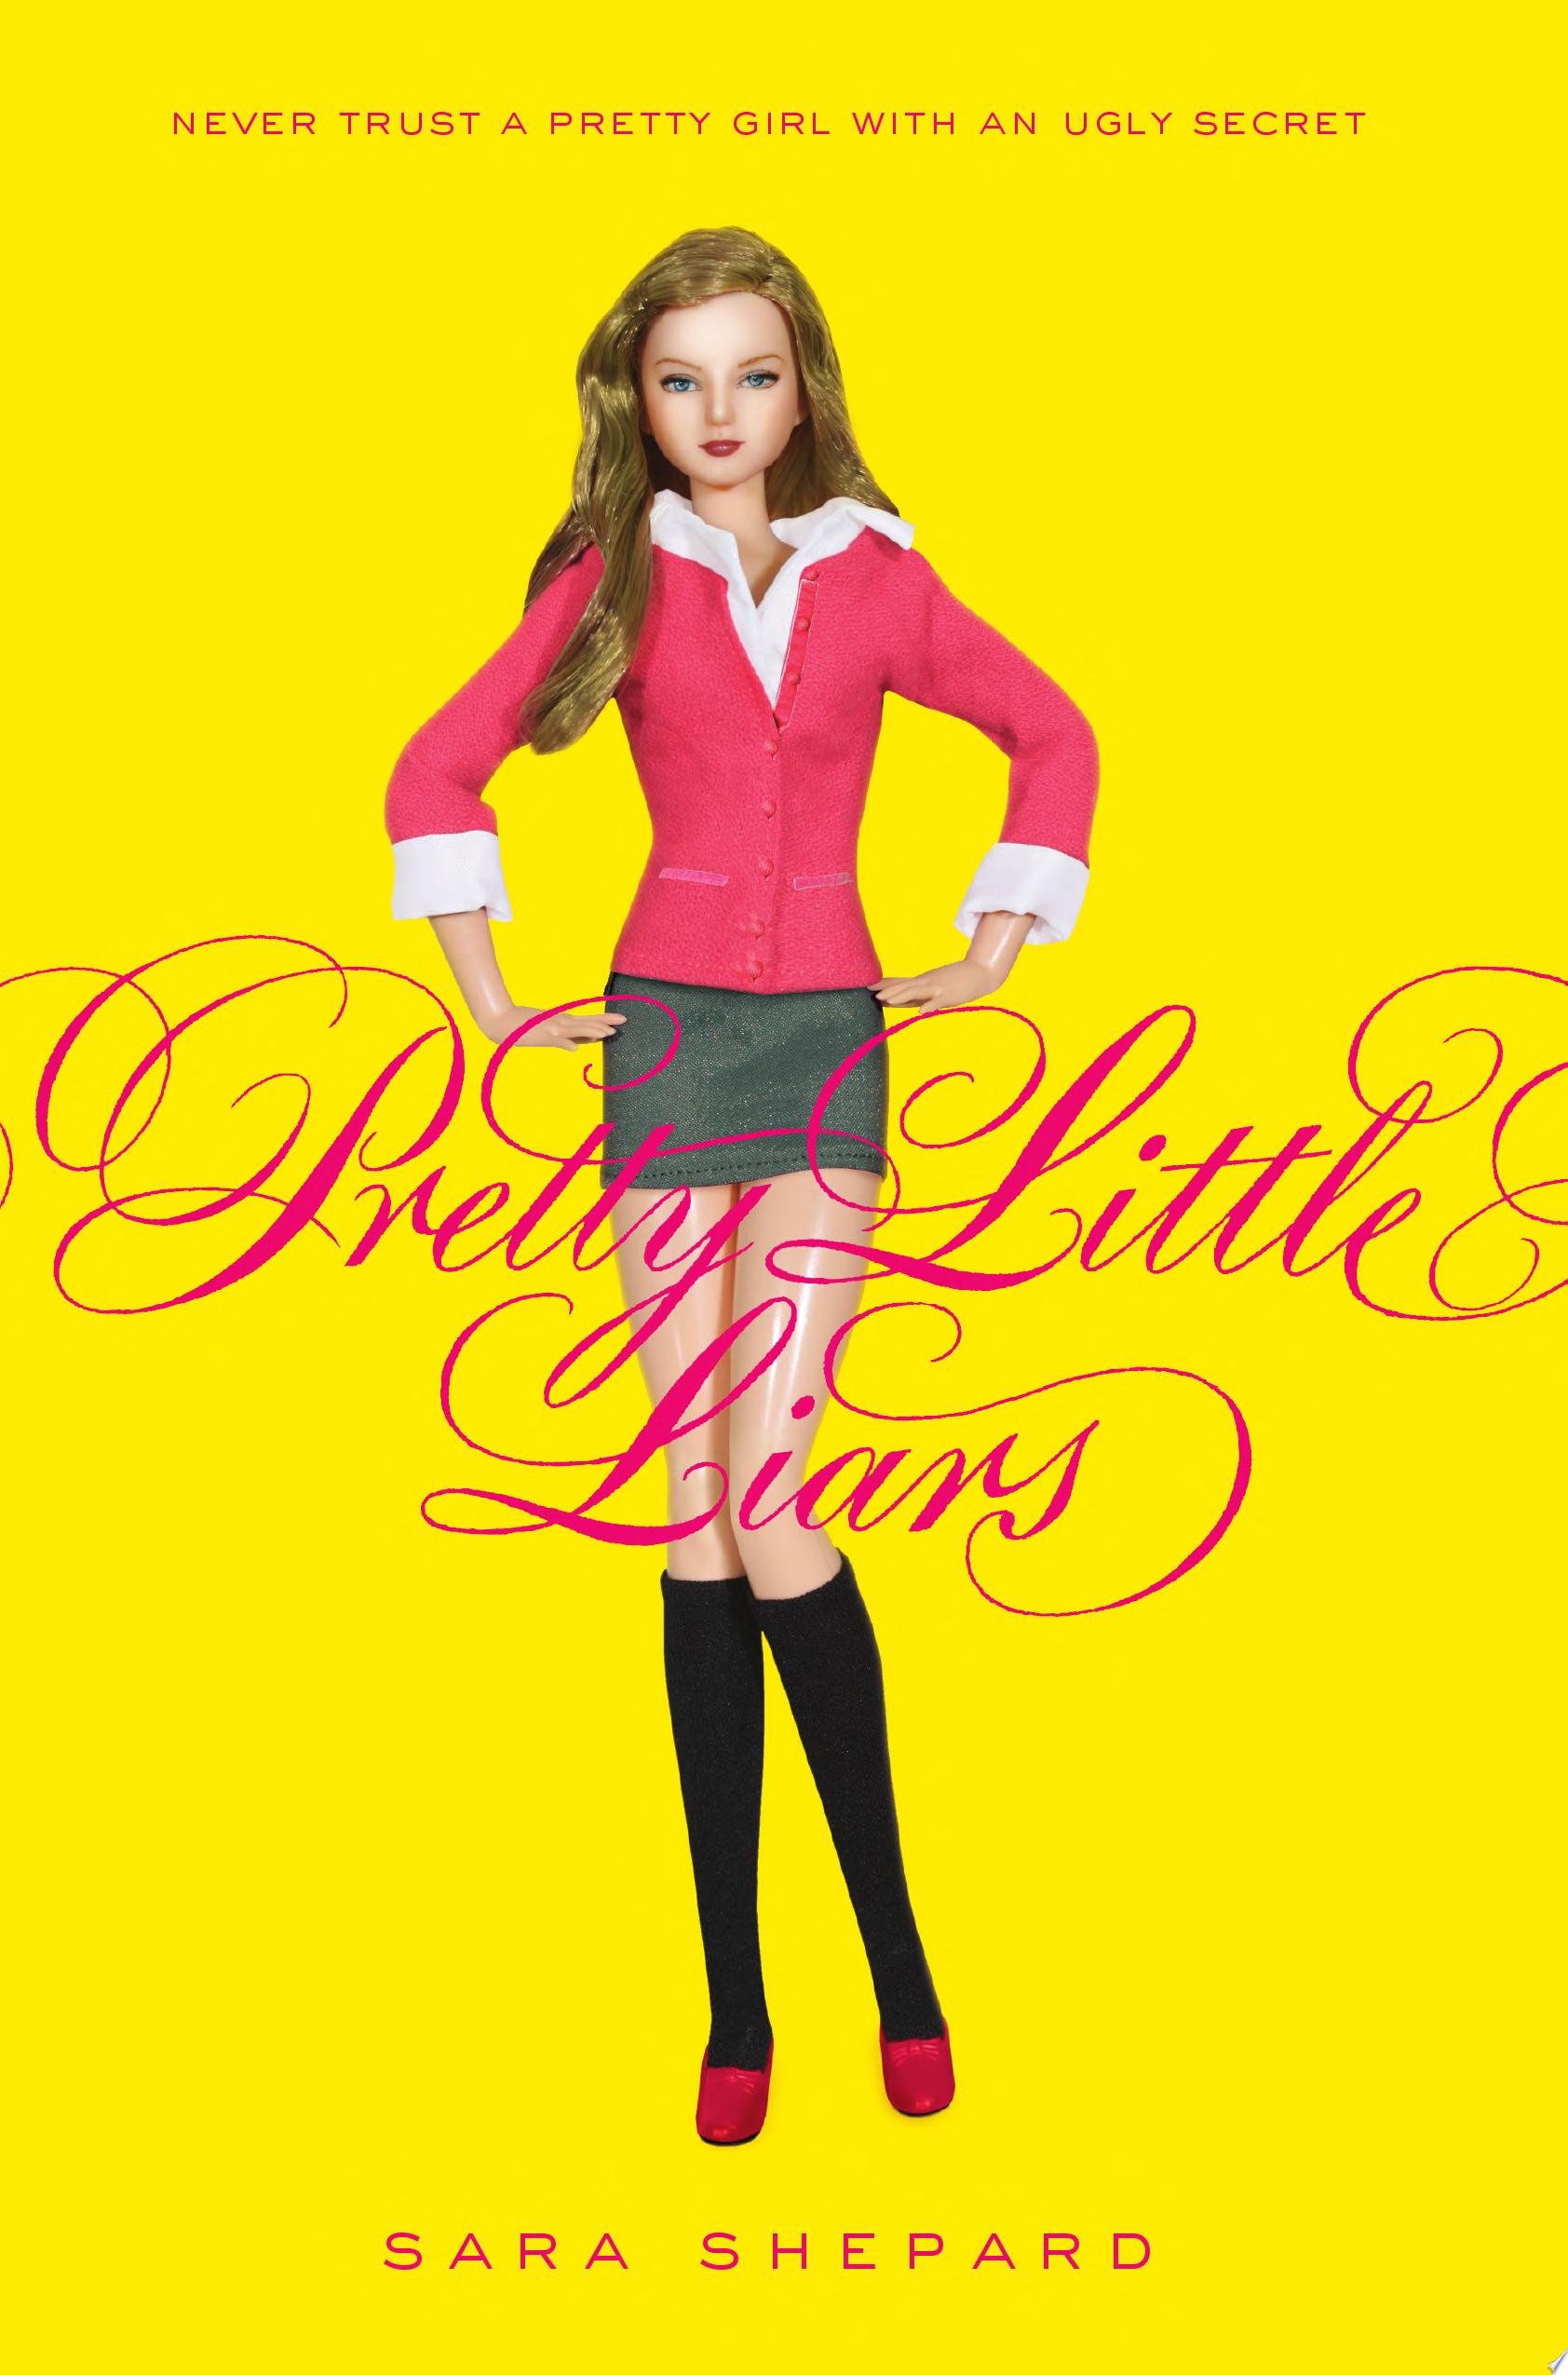 Image for "Pretty Little Liars"